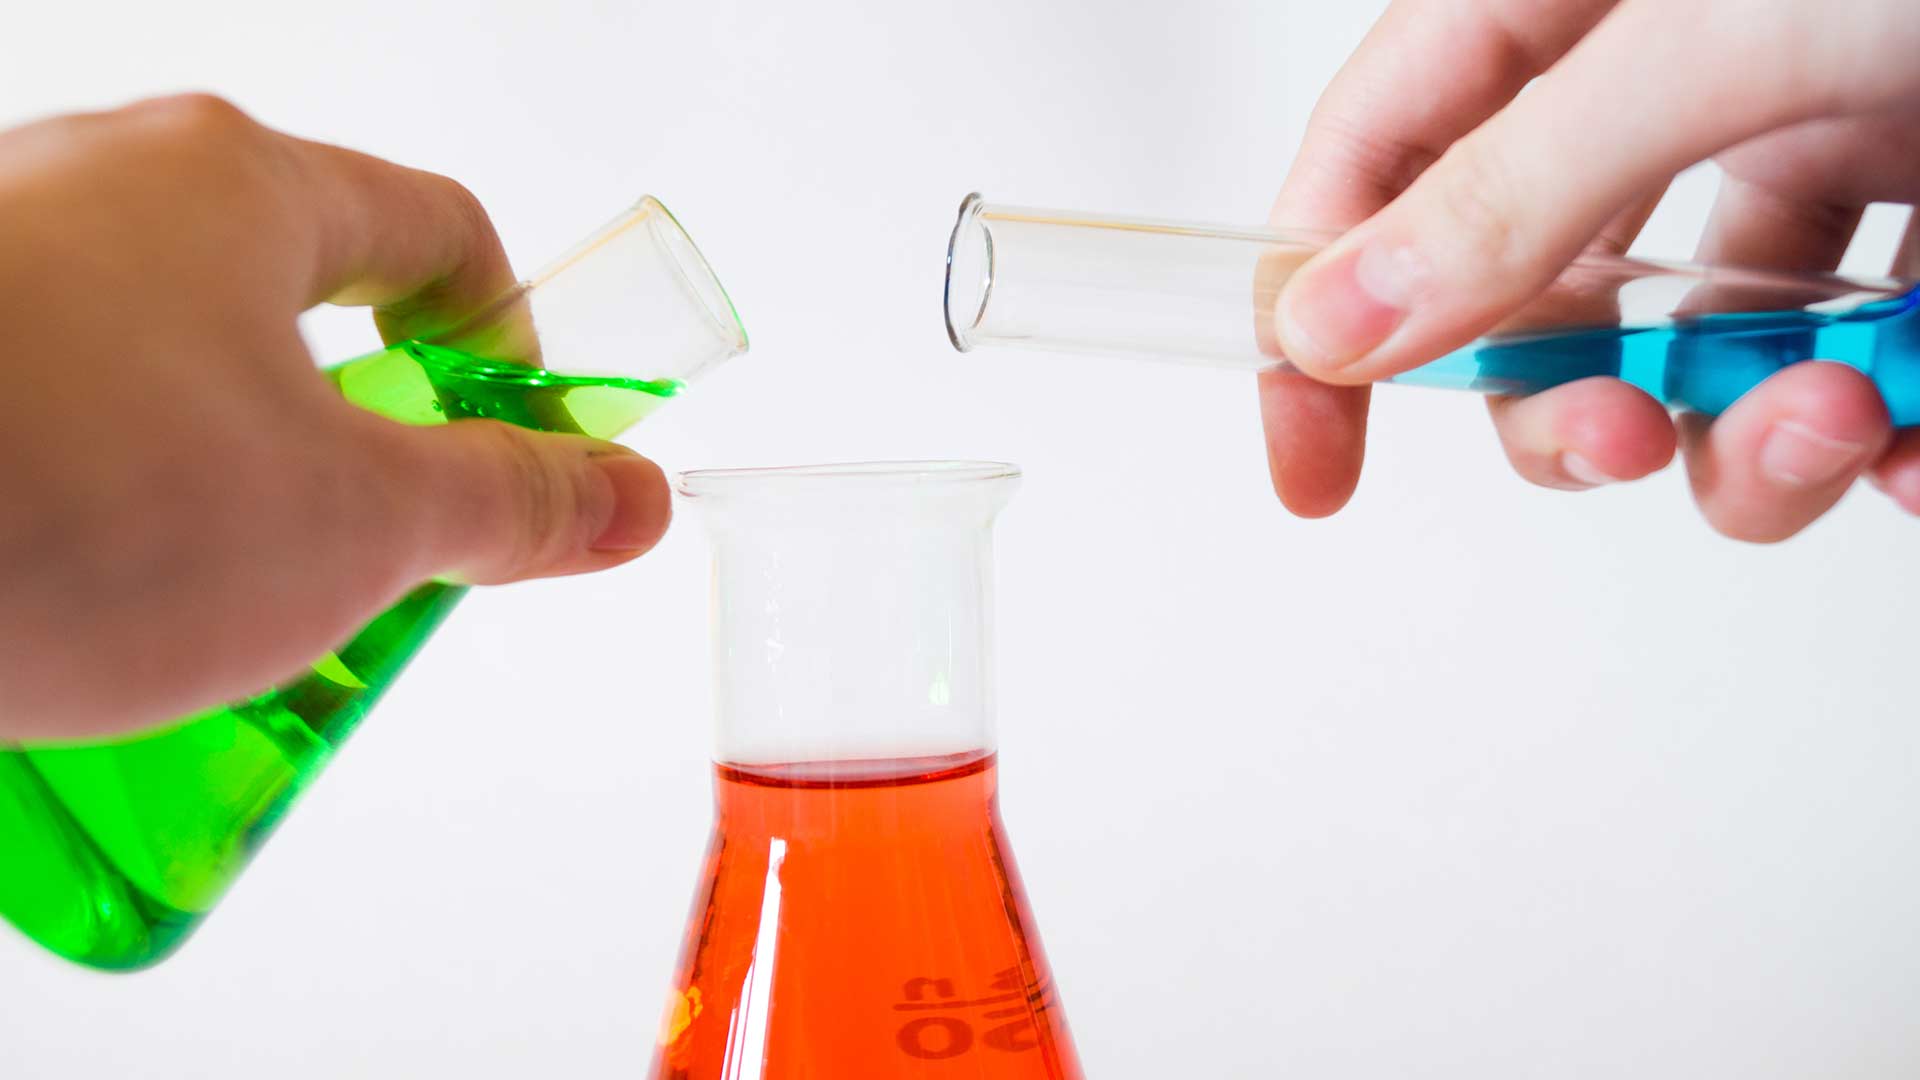 4 Awesome Summer Science Experiments and Activities for Kids